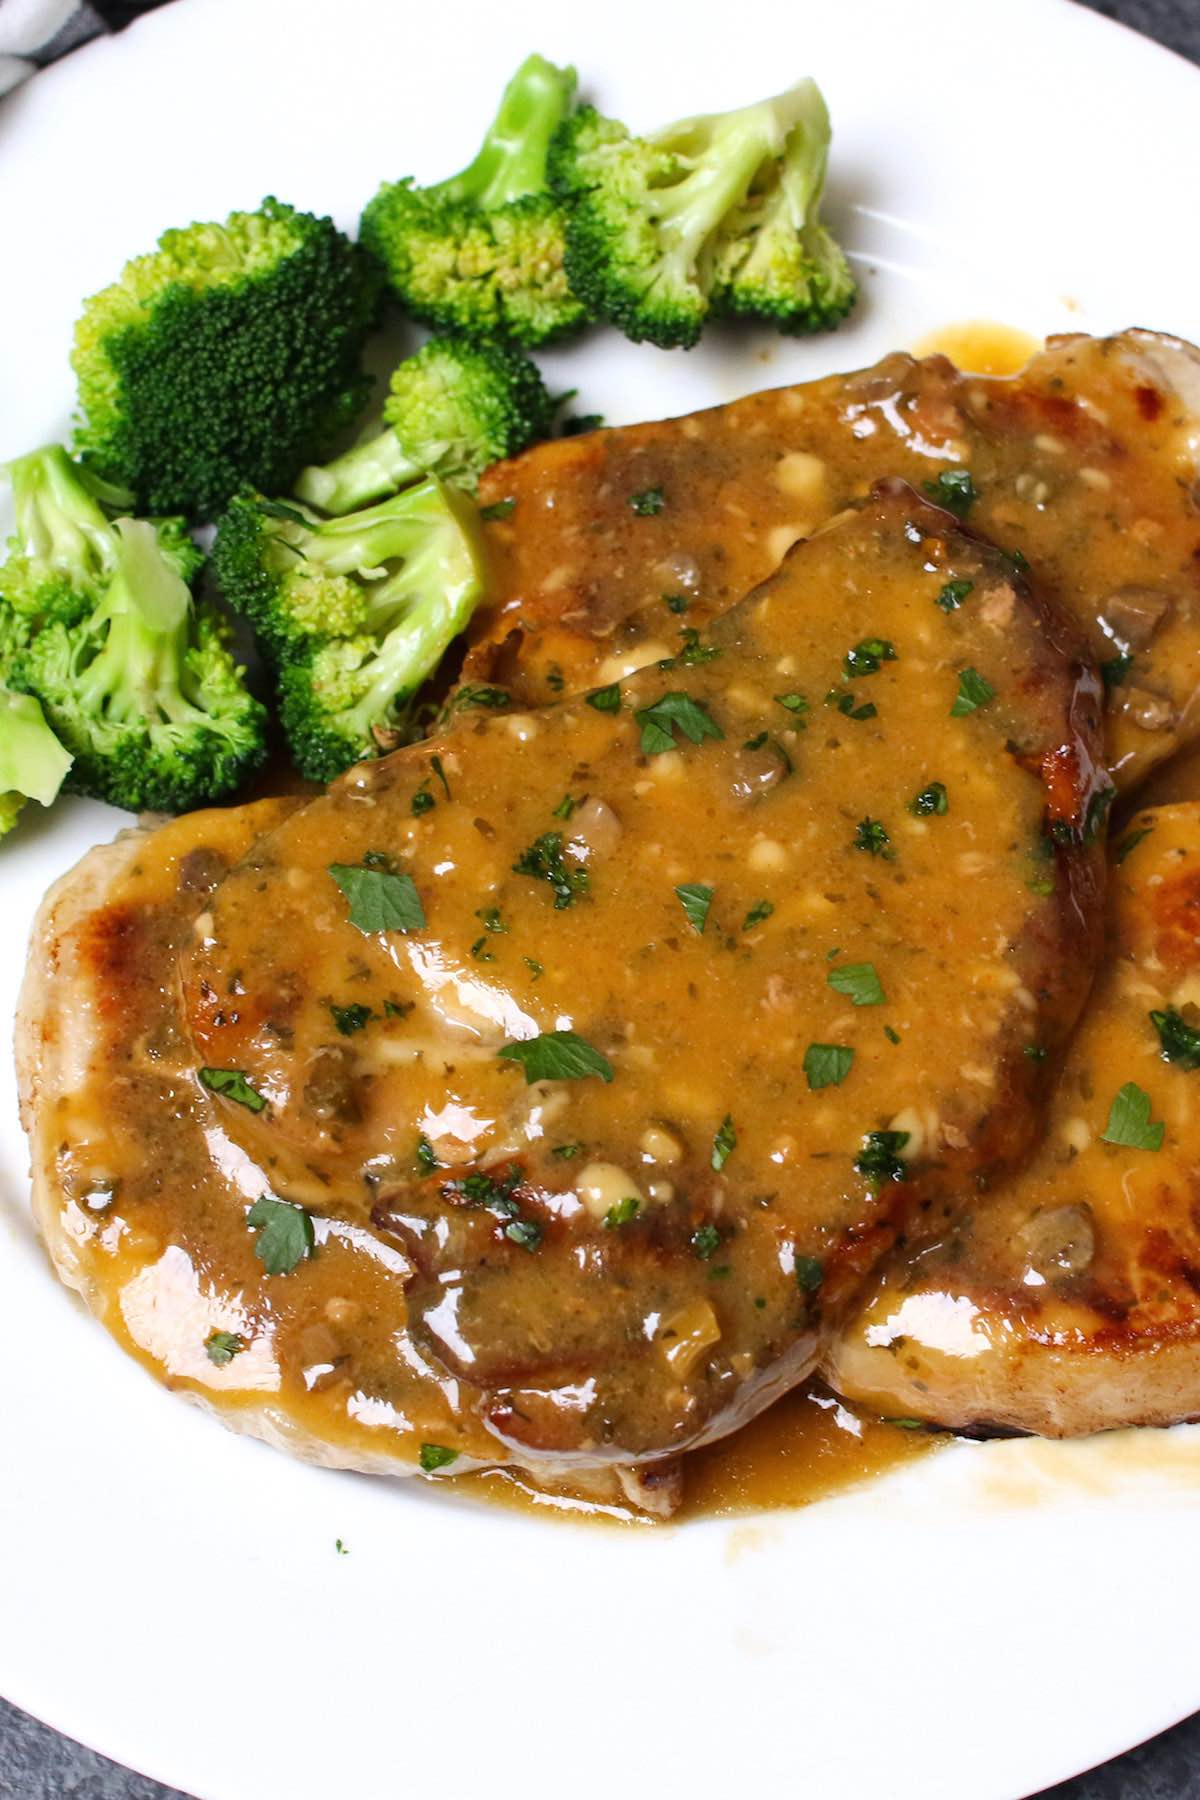 Crockpot ranch pork chops on a serving plate garnished with parsley and served with broccoli